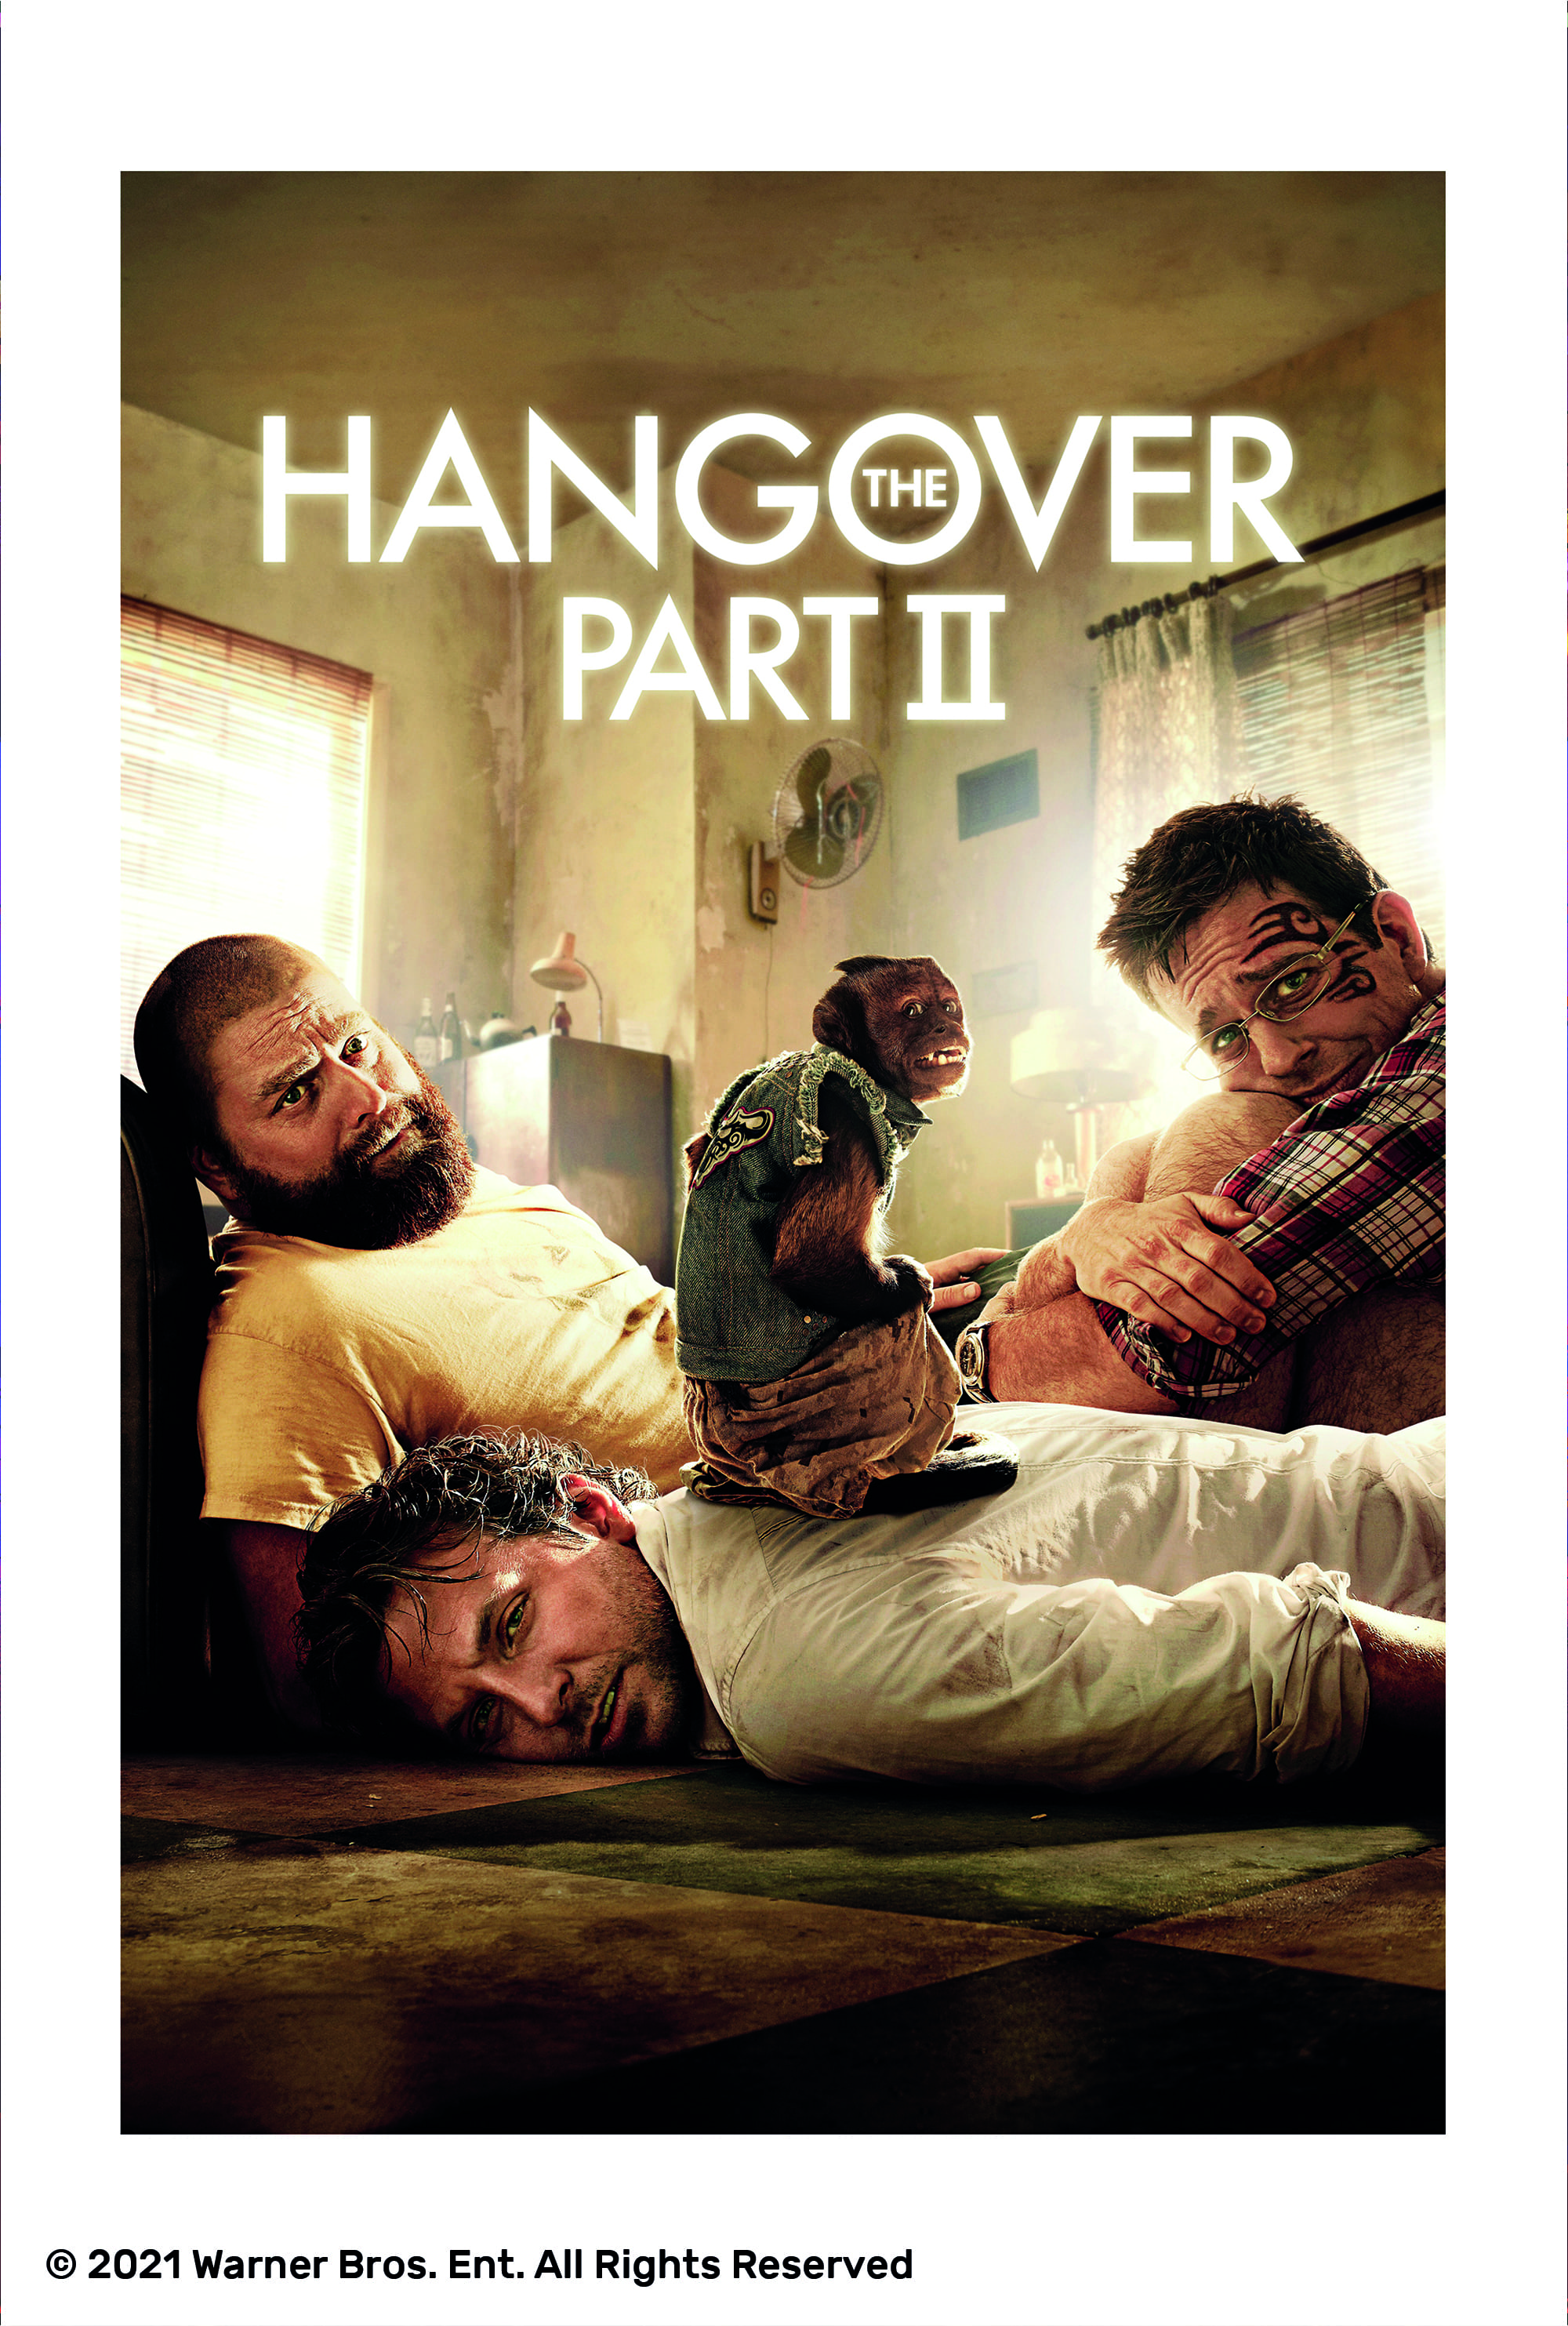 21.TheHangoverPartII Copyright 2000x296614